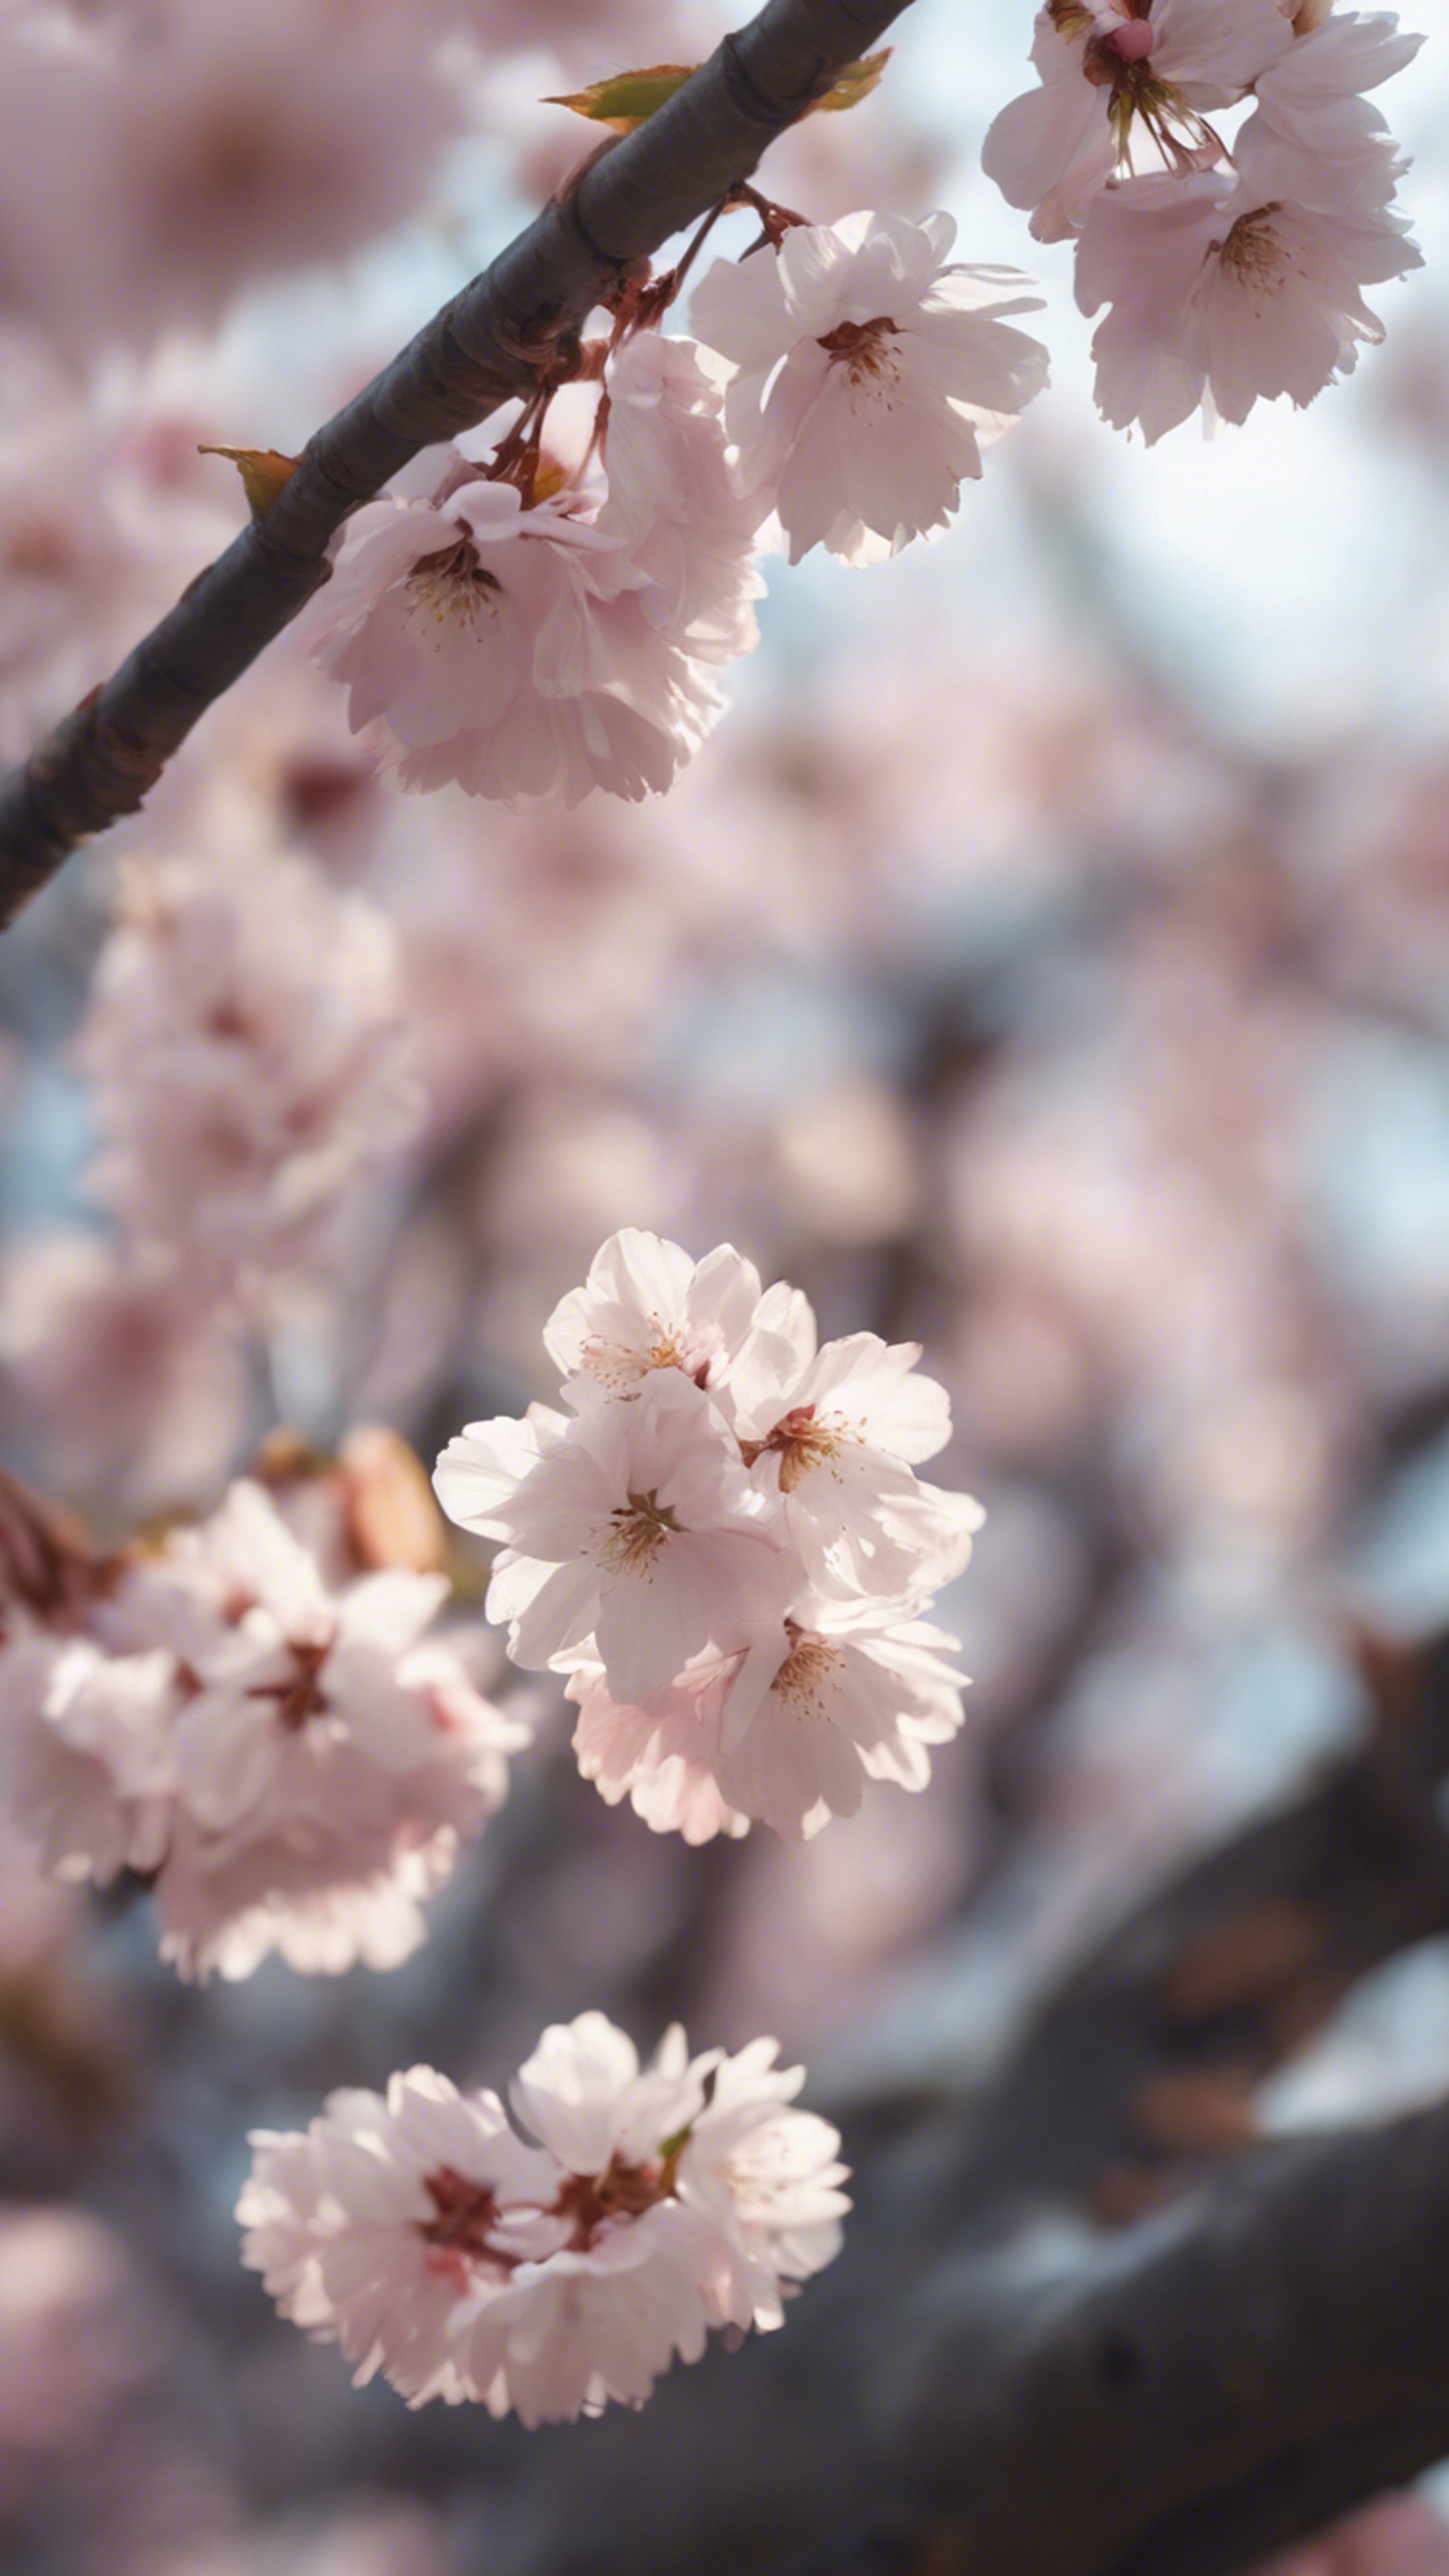 A close-up view of cherry blossom petals falling gently from the tree. Behang[73cf20157d554b6991b4]